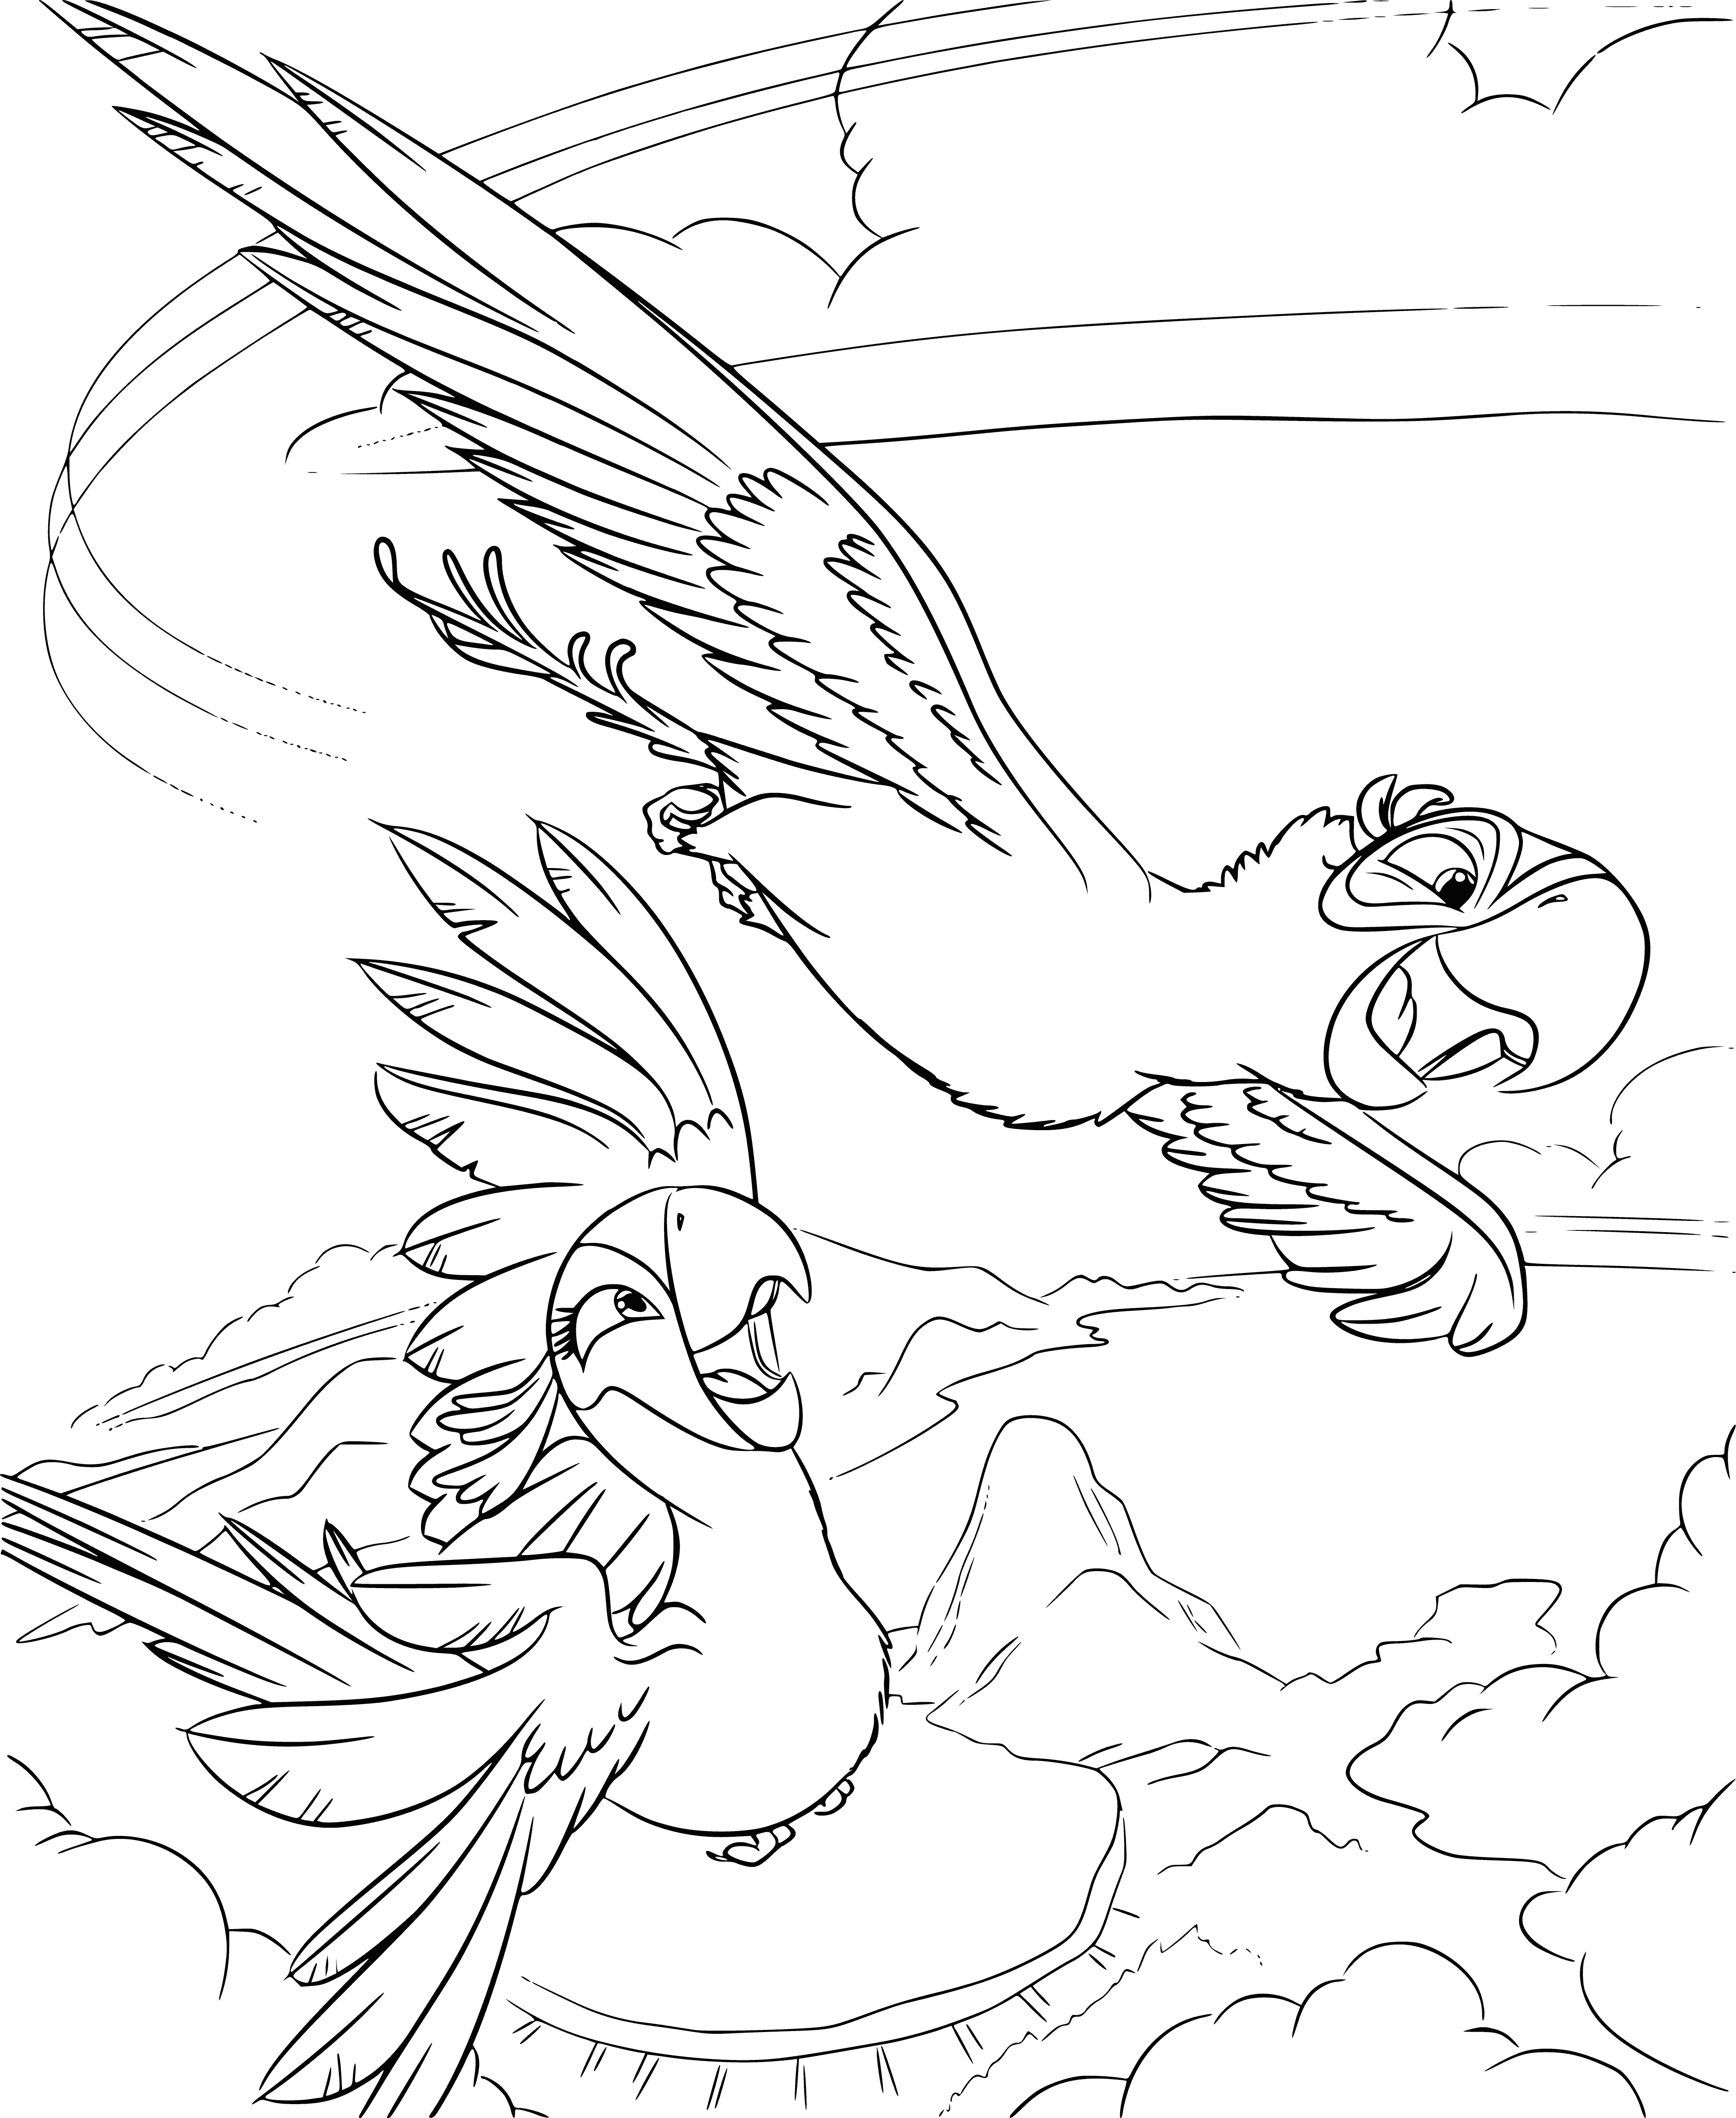 coloring page: A large silver airplane roars down the runway, its red & blue stripes shimmering in the sunlight, passengers snug with their window shades down.